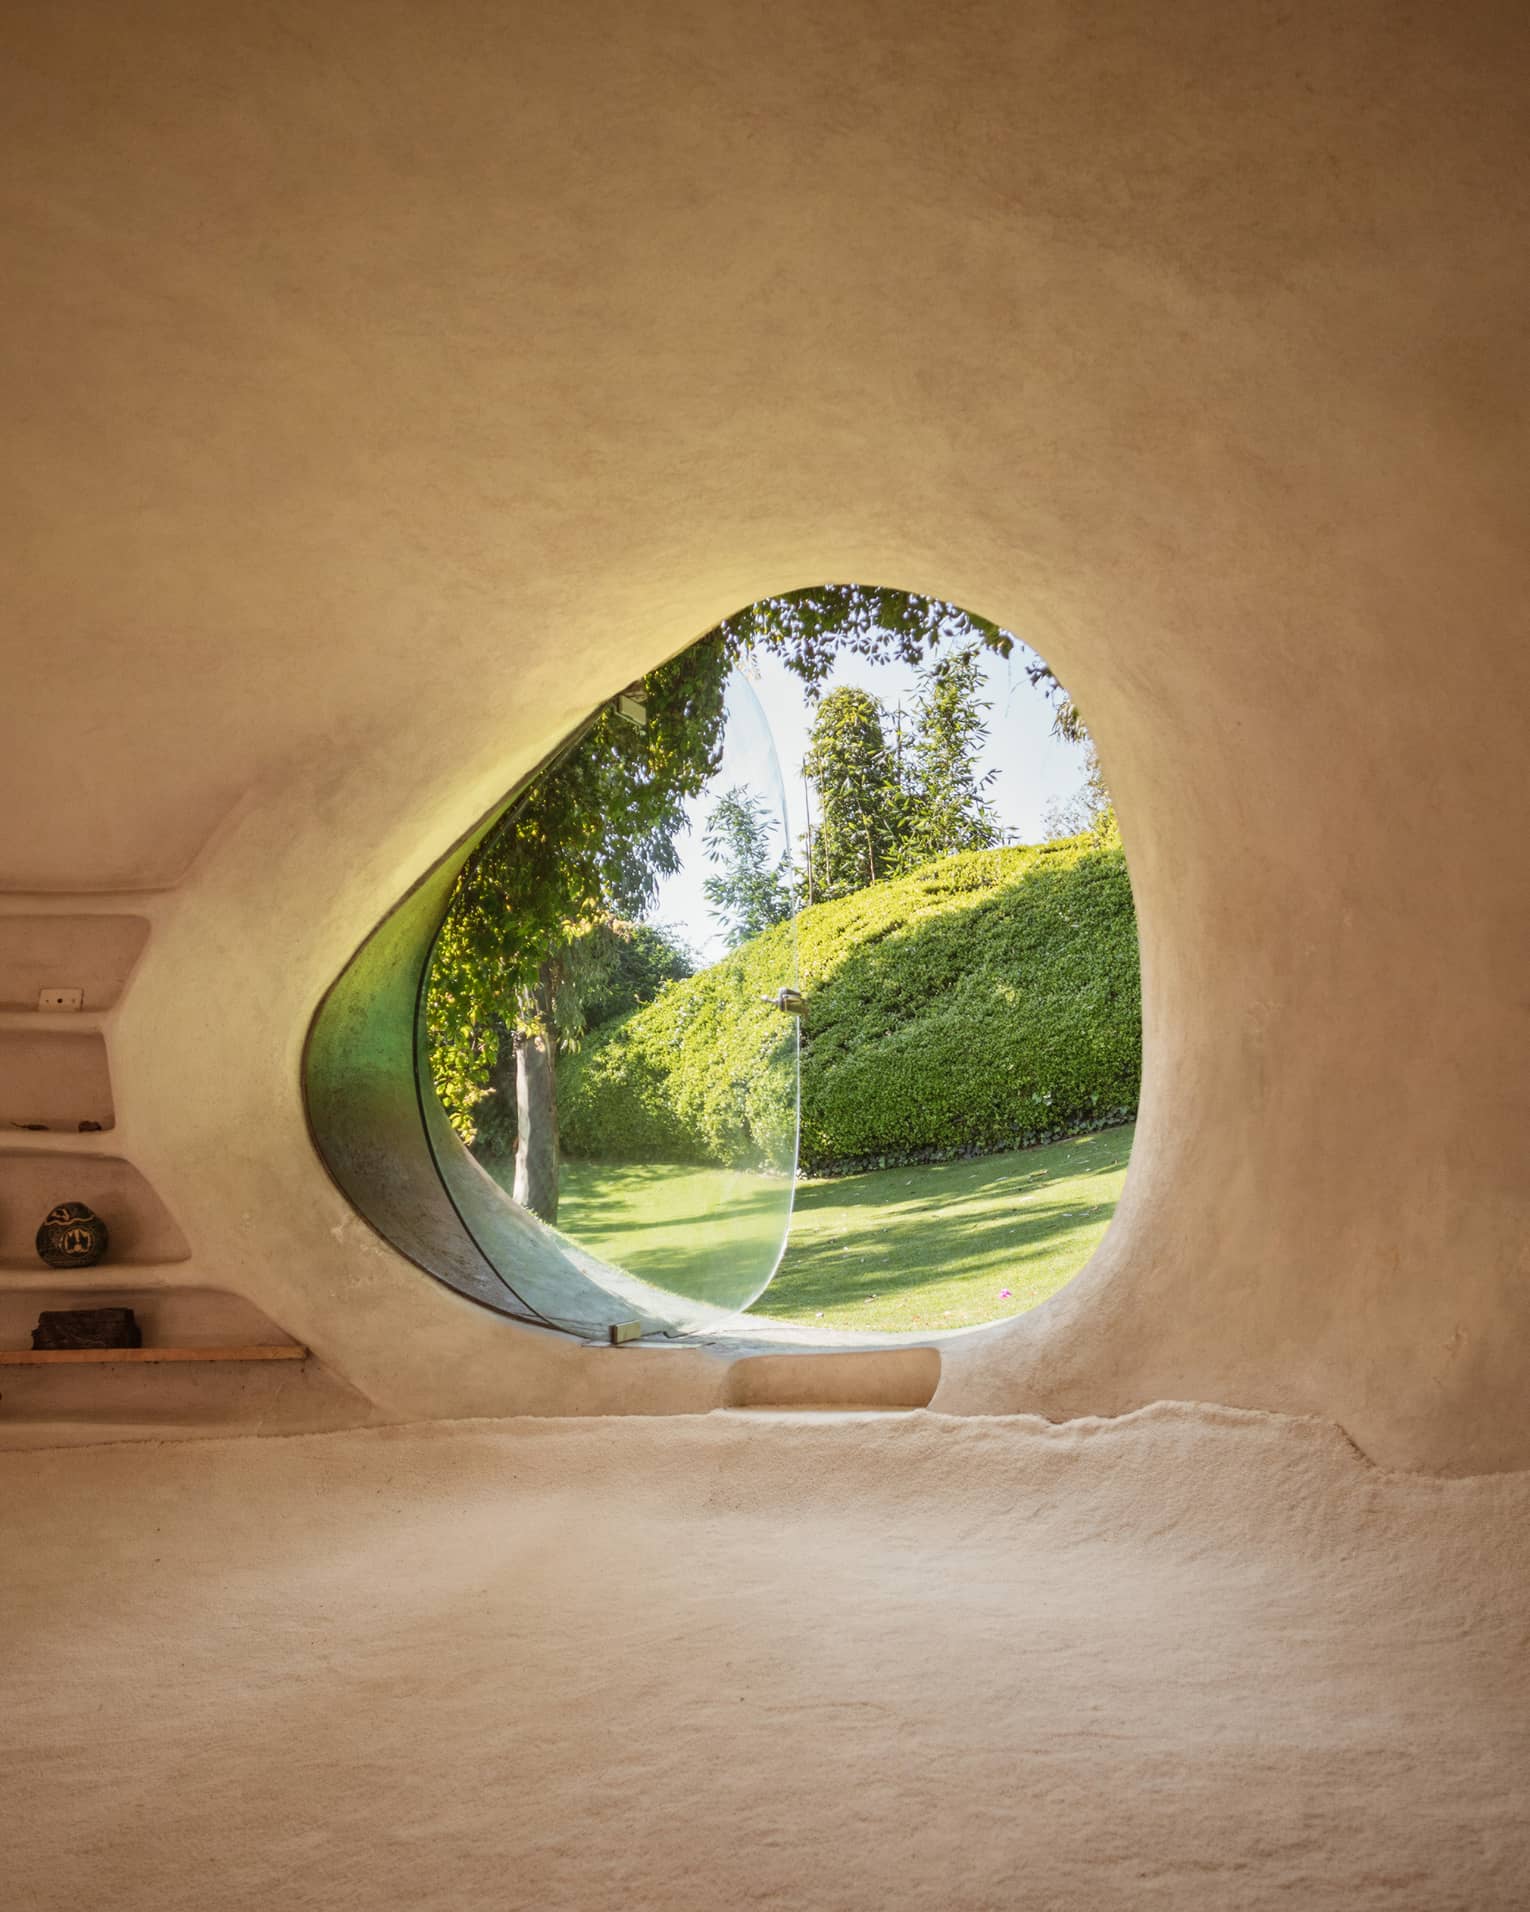 Smooth, adobe wall frames a curved, asymmetrical window, glass pivoted out, a verdant yard with large pruned hedge in view.